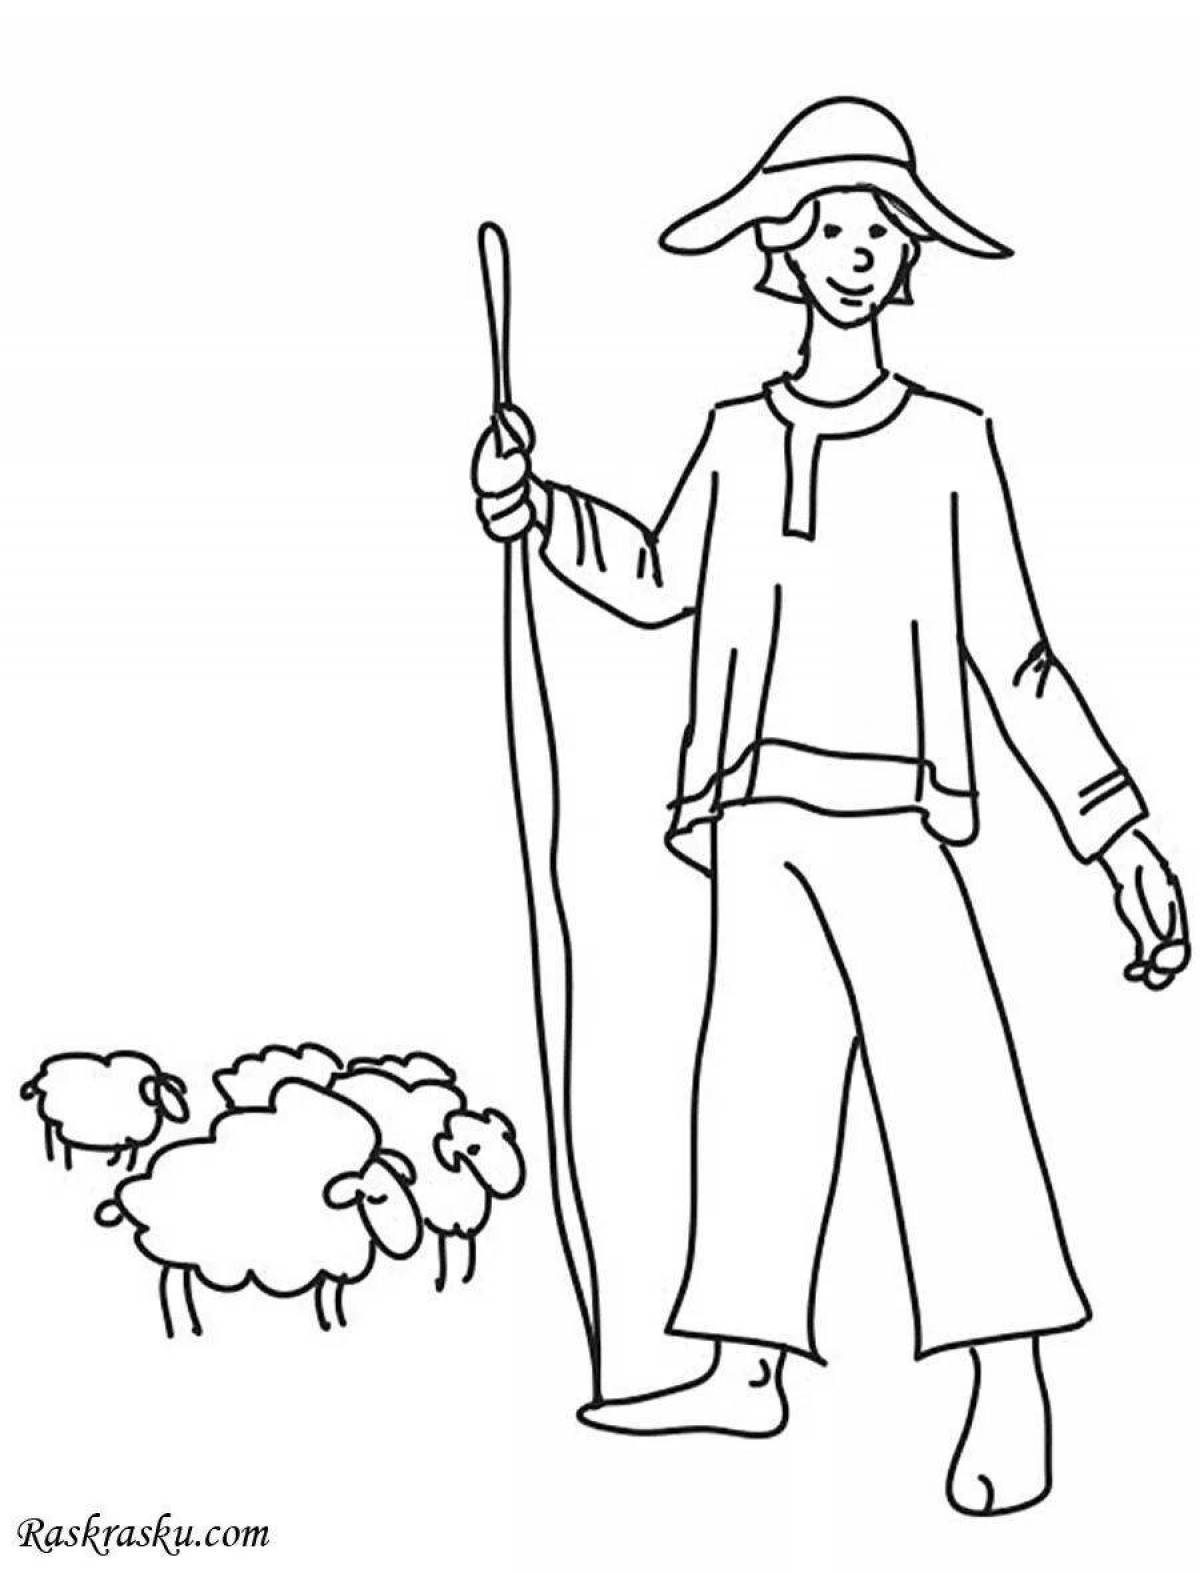 Coloring page merry shepherd